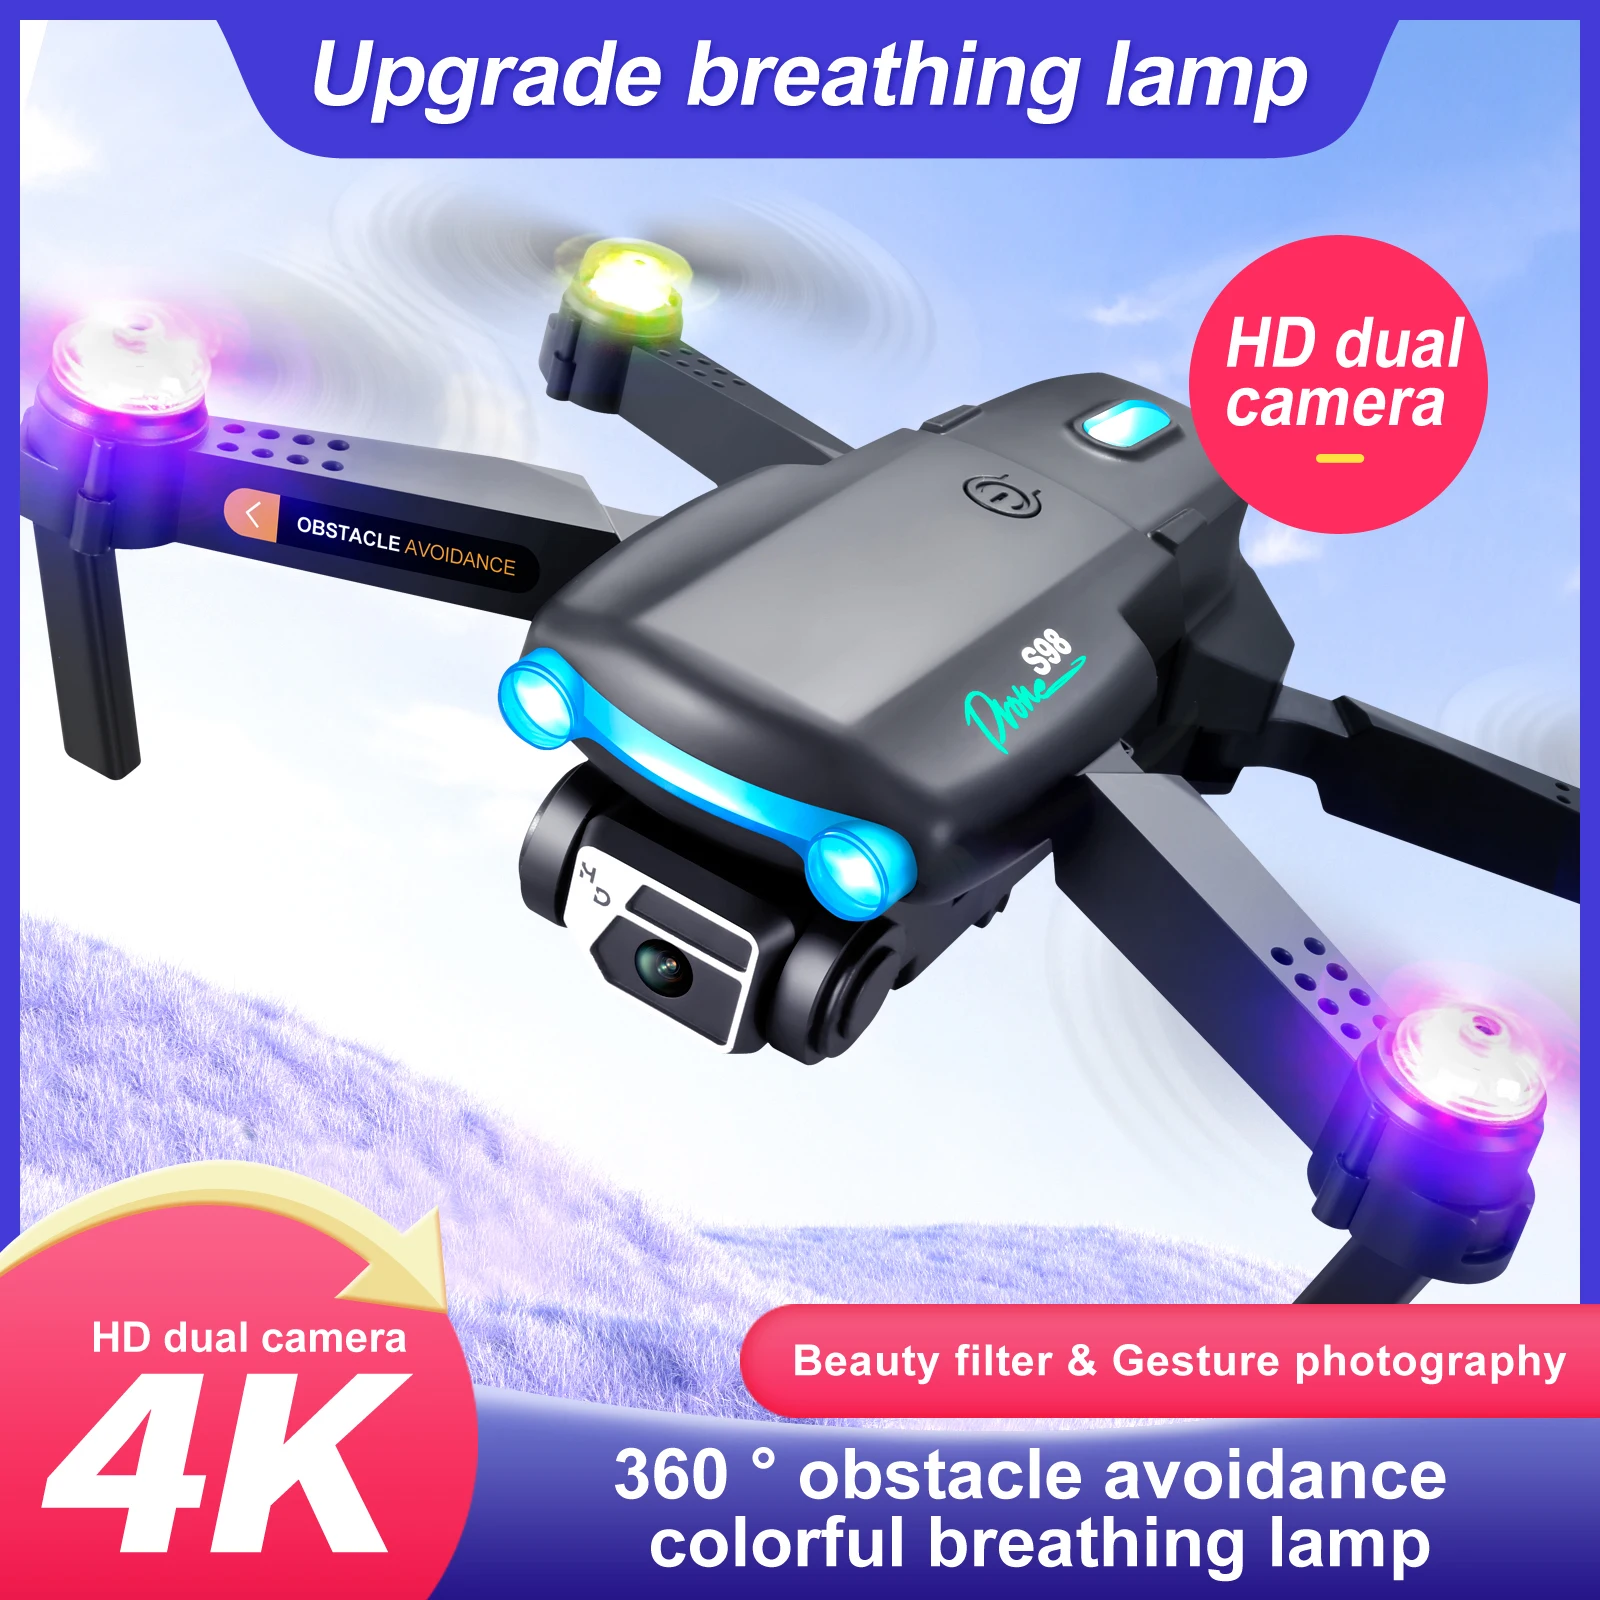 

4K HD Camera RC Quadcopter Drone 6-Axis Gyroscope 2.4GHz 4CH RC Drone Toys Aerial Photography Obstacle Avoidance with LED Lights